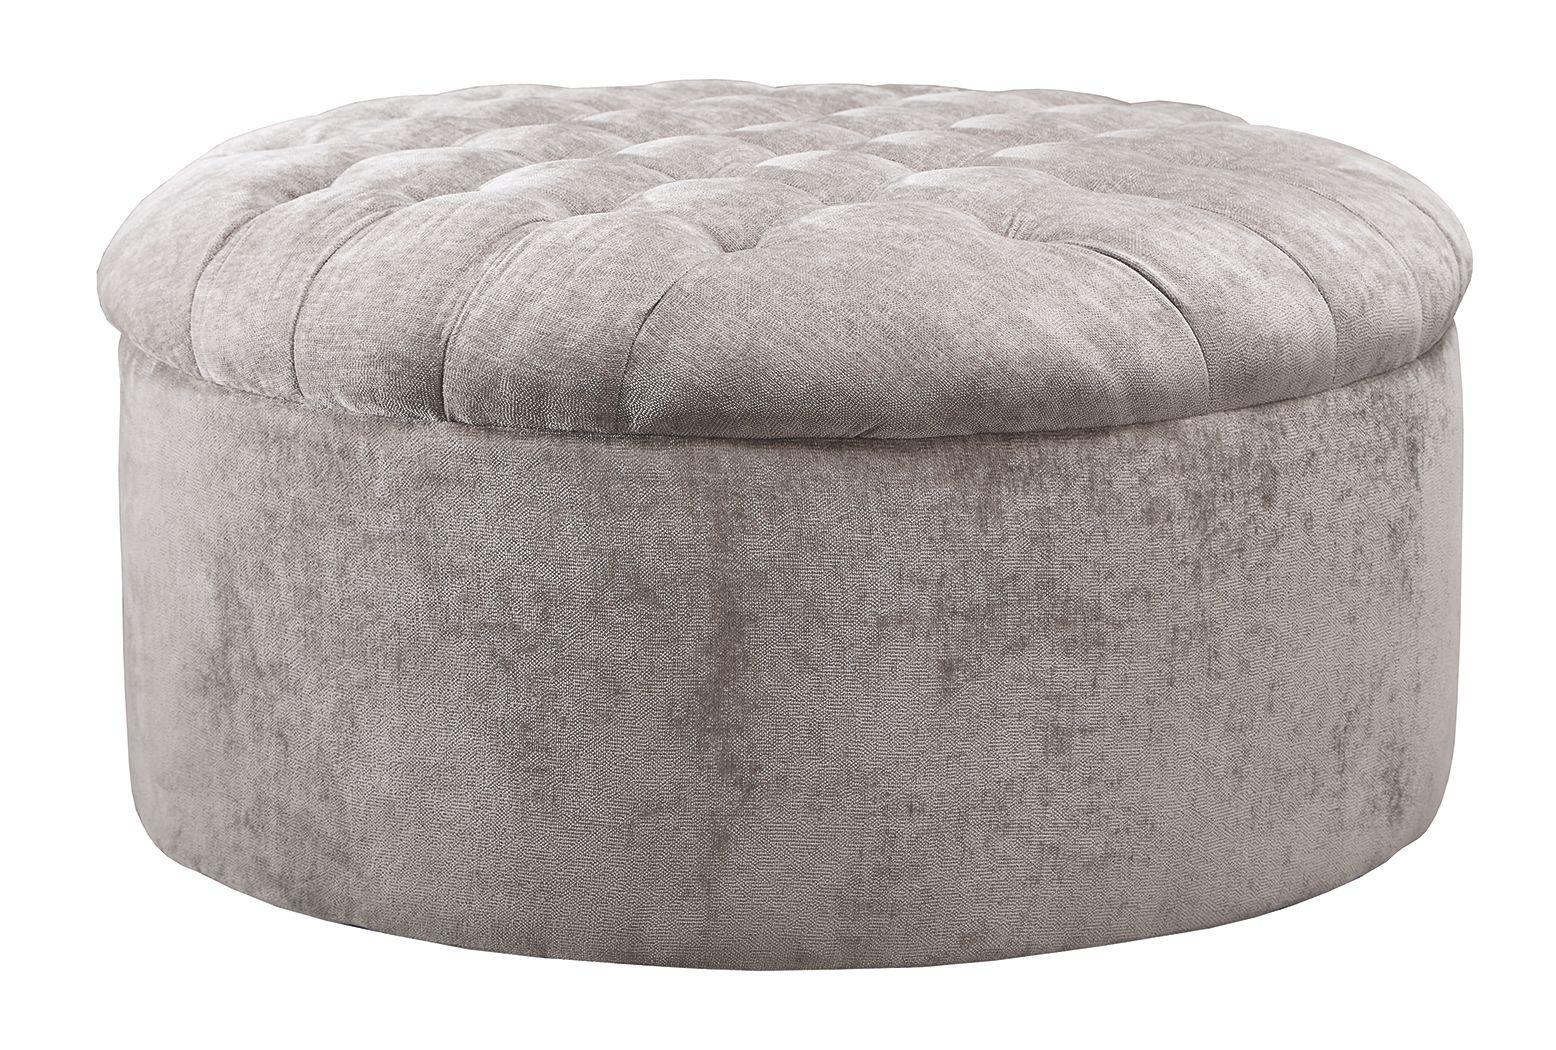 Ashley Furniture - Carnaby - Linen - Oversized Accent Ottoman - 5th Avenue Furniture